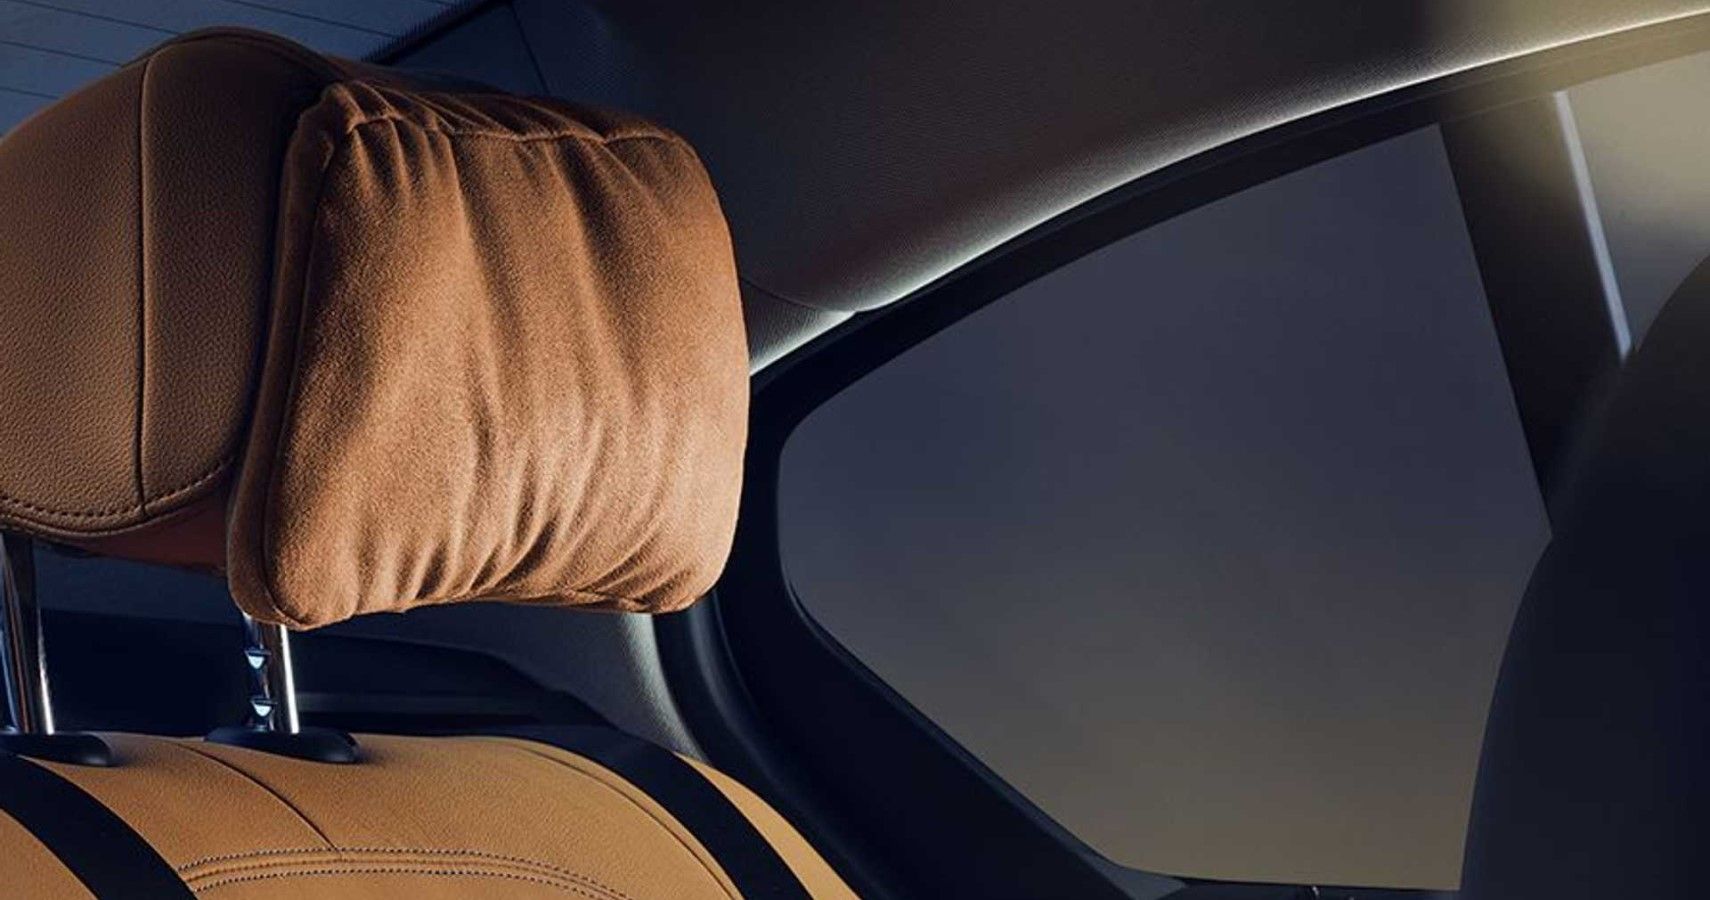 BMW 3-Series Gran Limousine Iconic Edition cushion-laden rear headrest close-up view